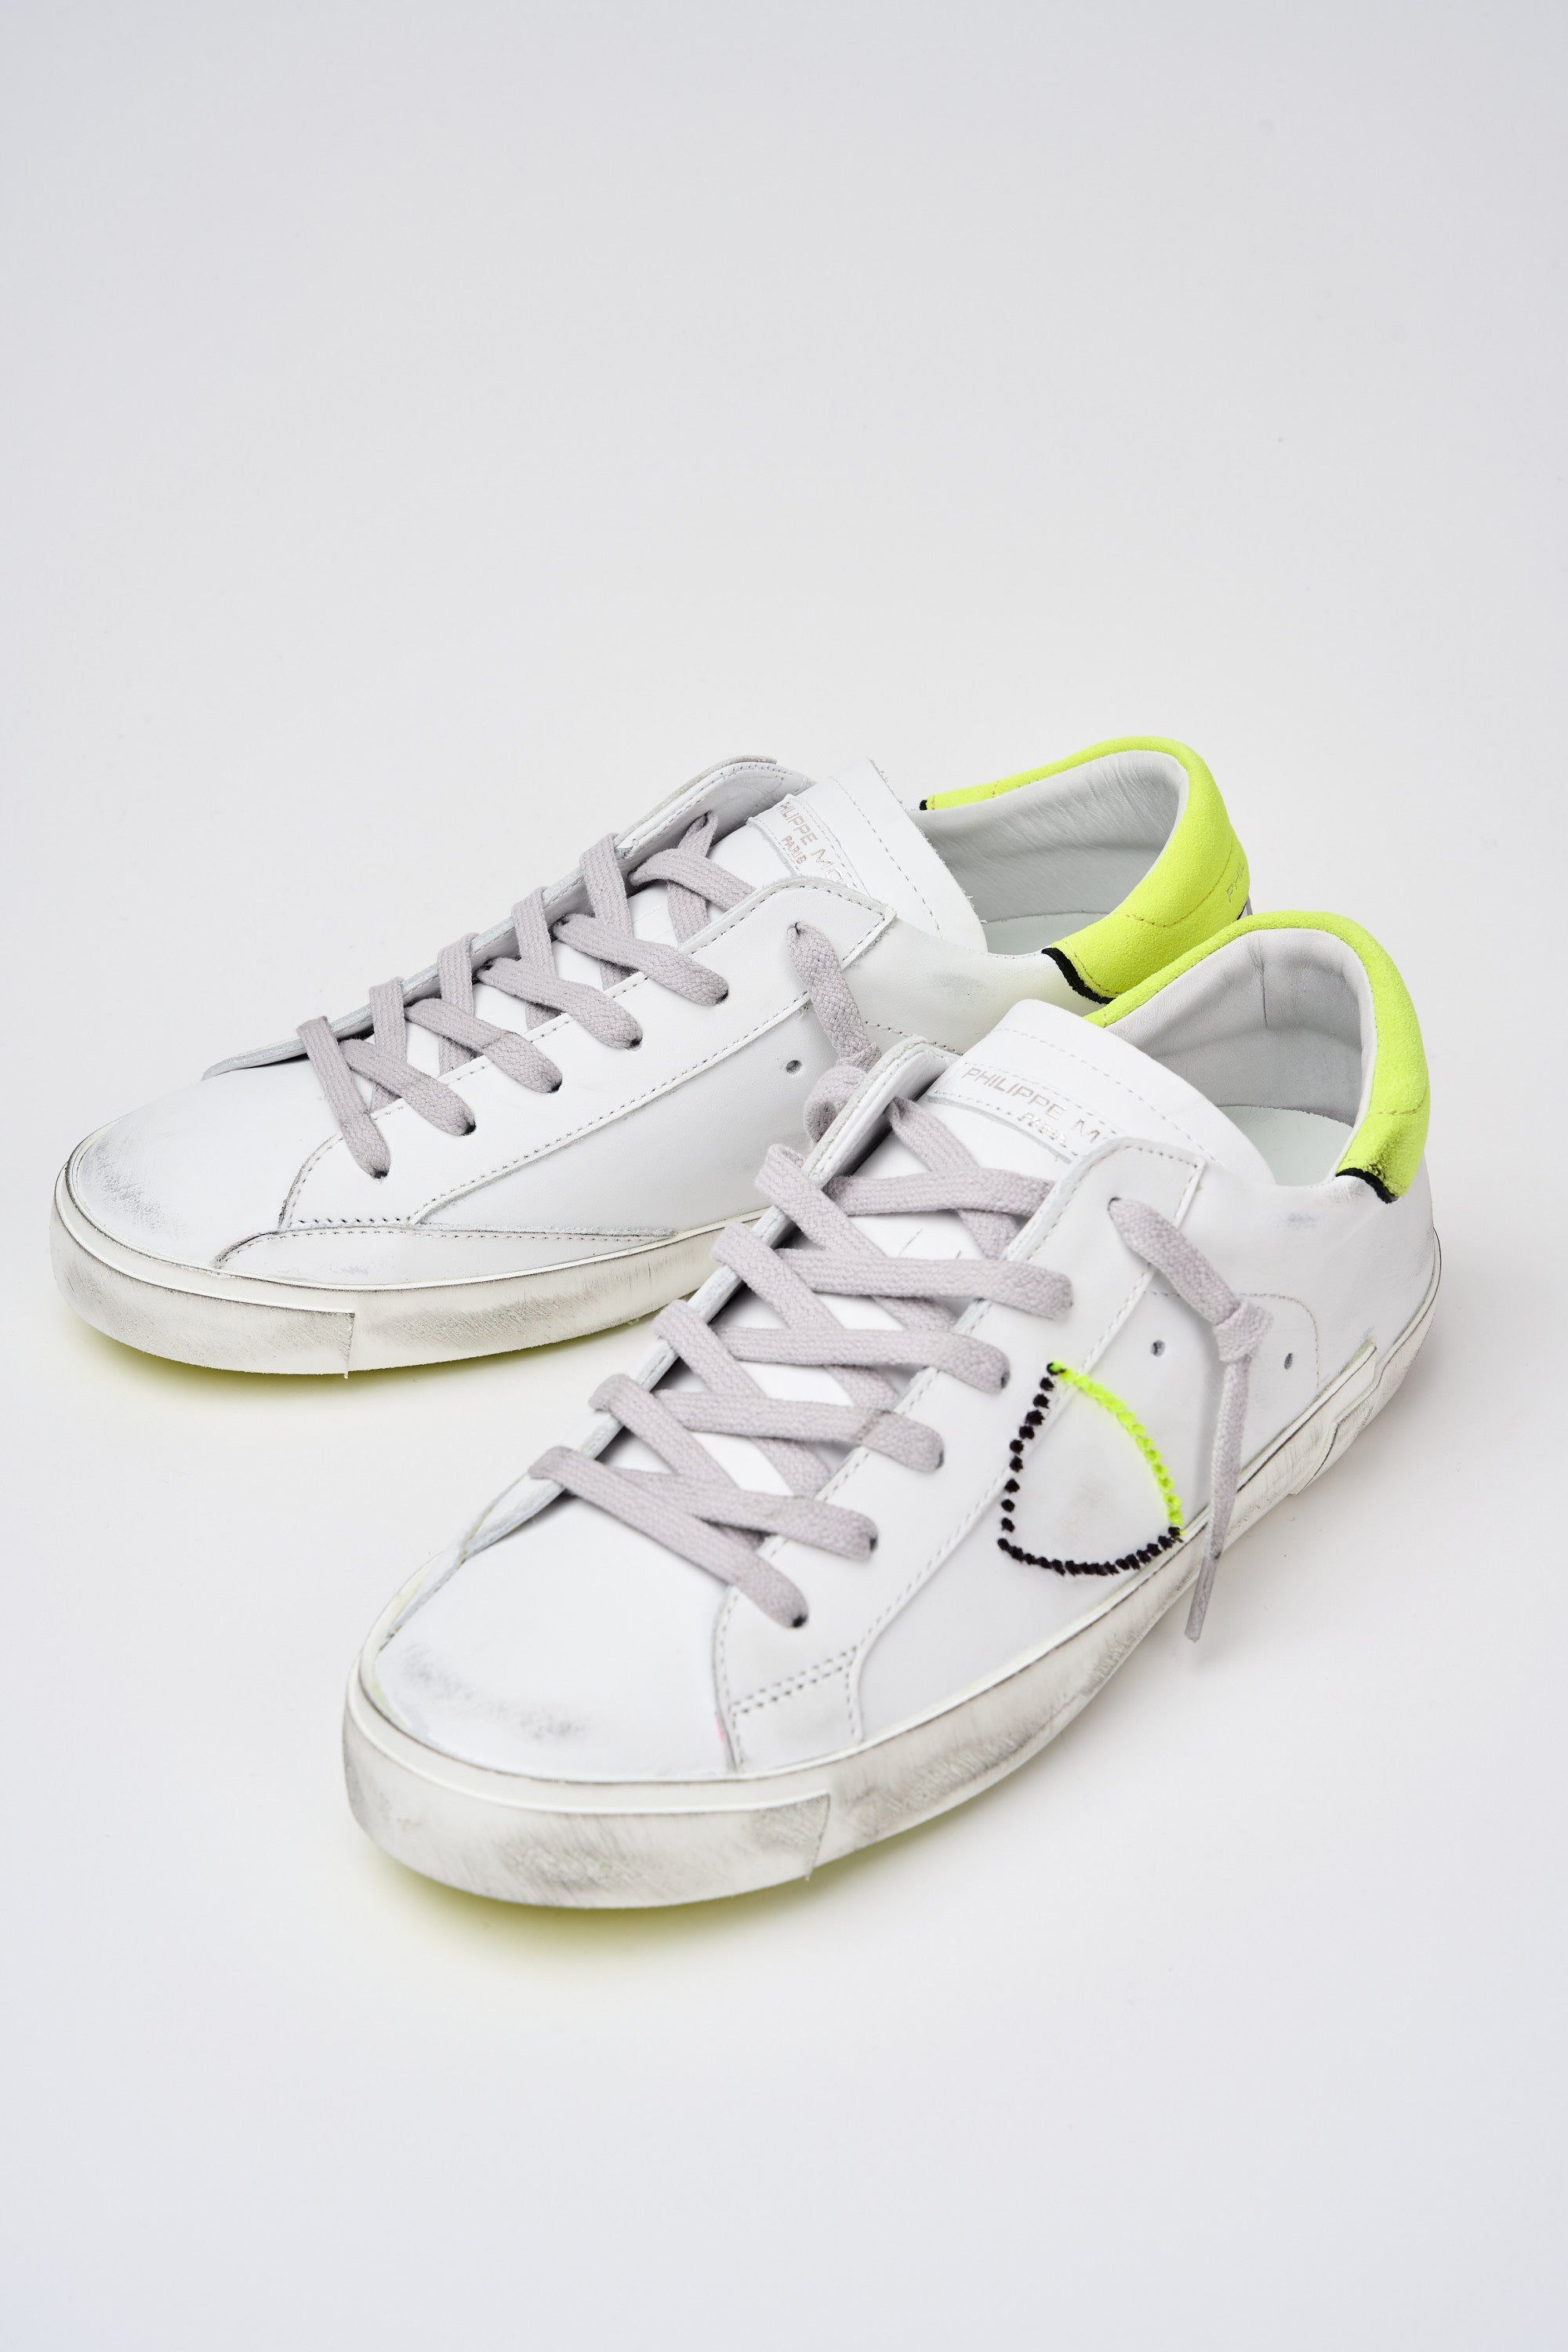 Philippe Model Sneaker Prsx Leather White/Yellow fluo-6